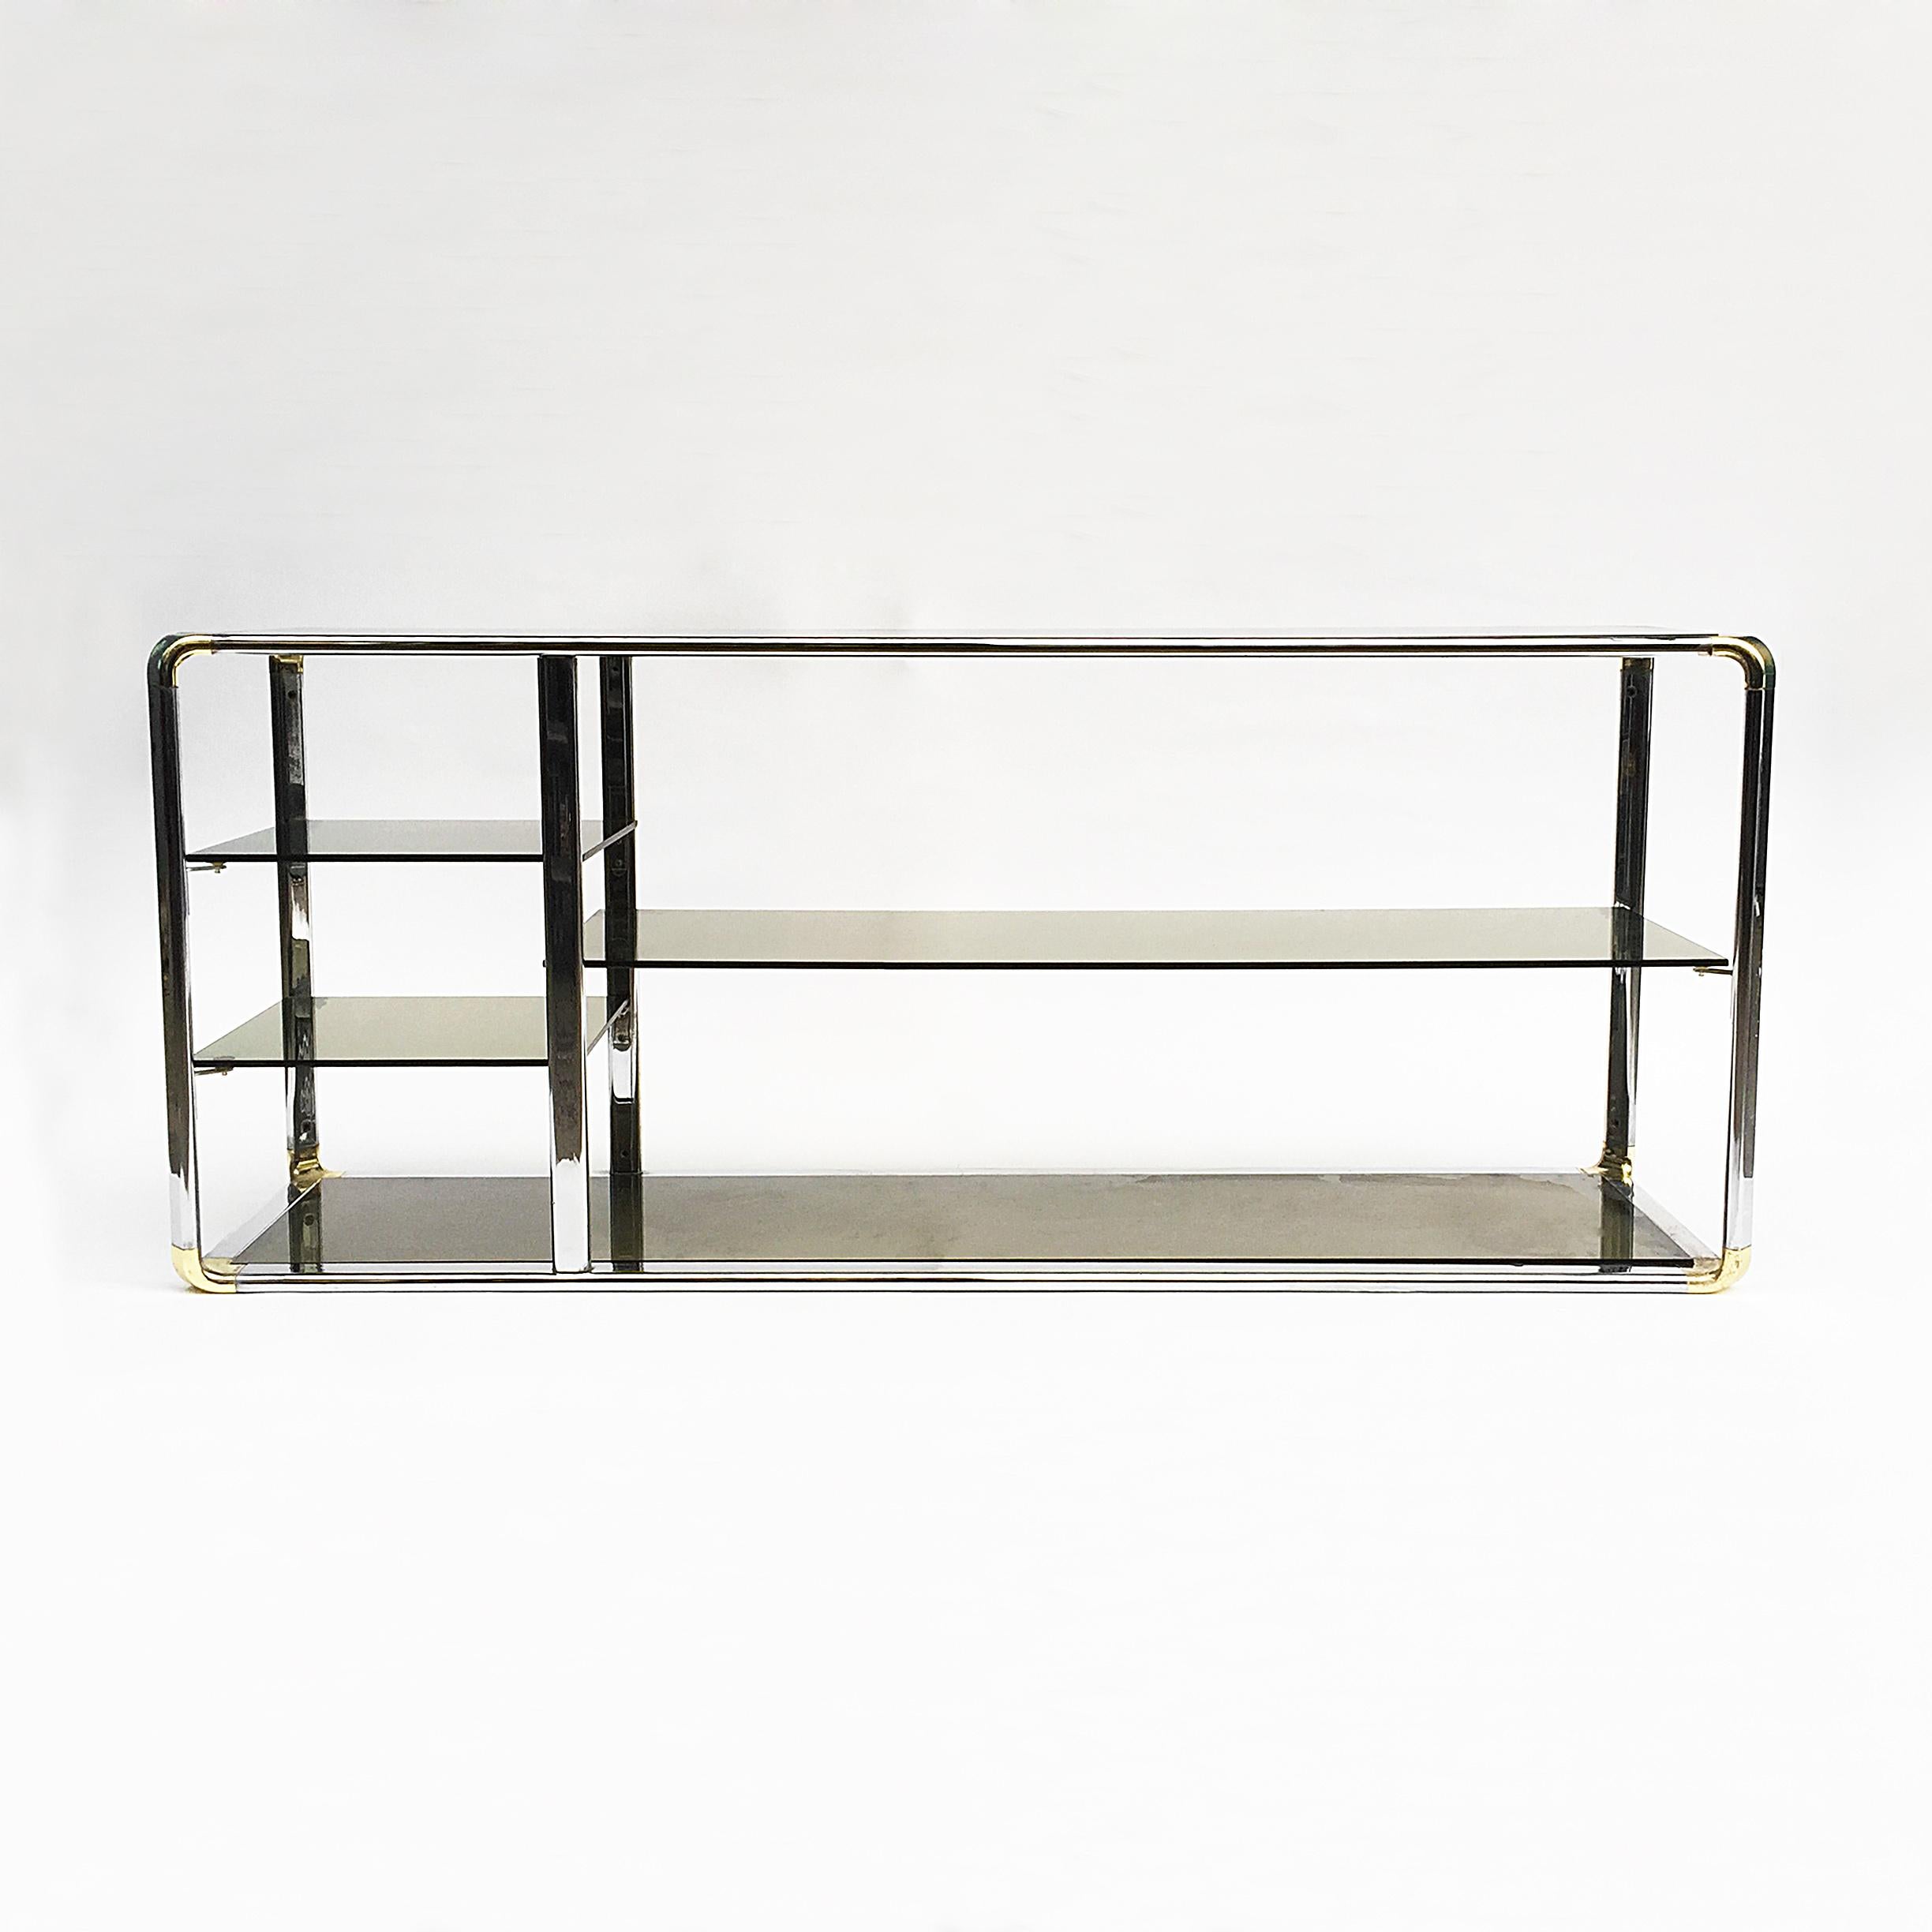 A chrome sound system display unit with smoked glass shelves. Chrome curved edges with brass plated corner details. Very practical and modern piece.